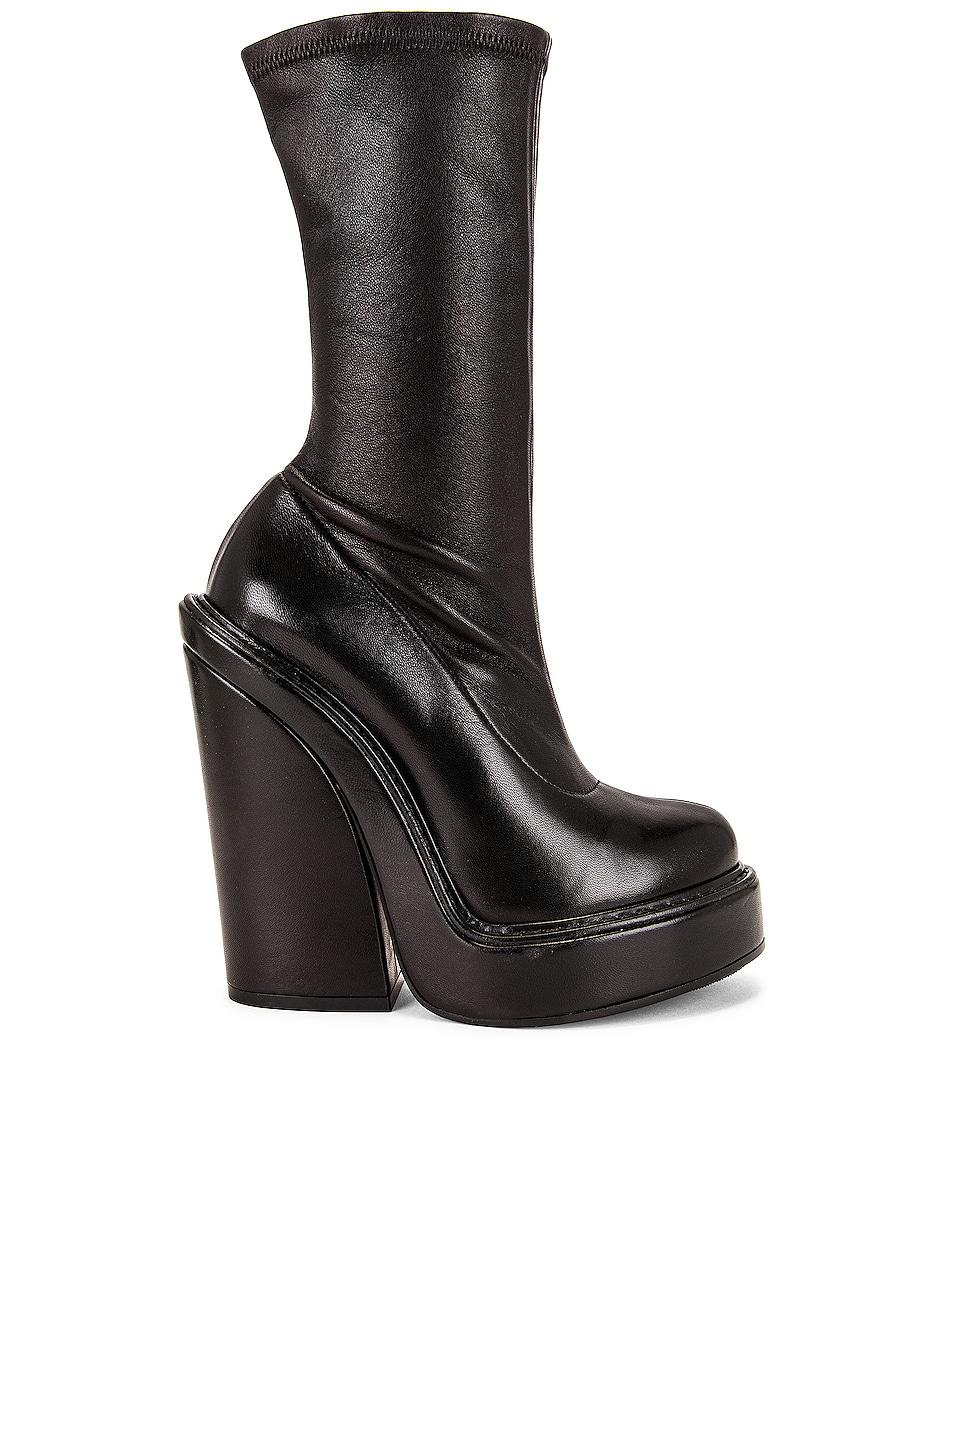 Givenchy Platform Boots in Black | Lyst